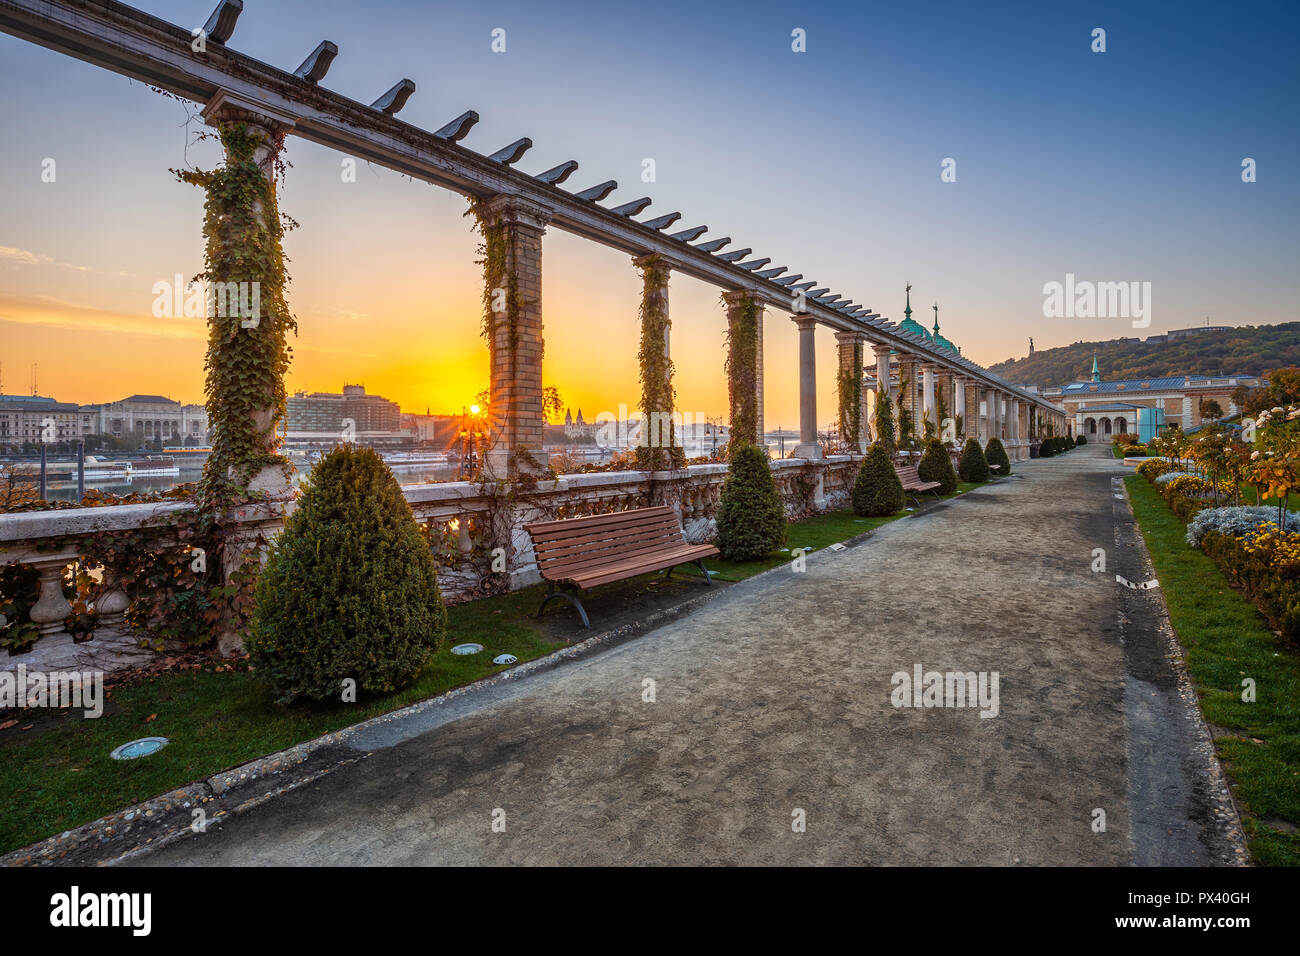 Budapest, Hungary - Beautiful sunrise at Varkert Bazaar with bench, Statue of Liberty at background and autumn foliage Stock Photo